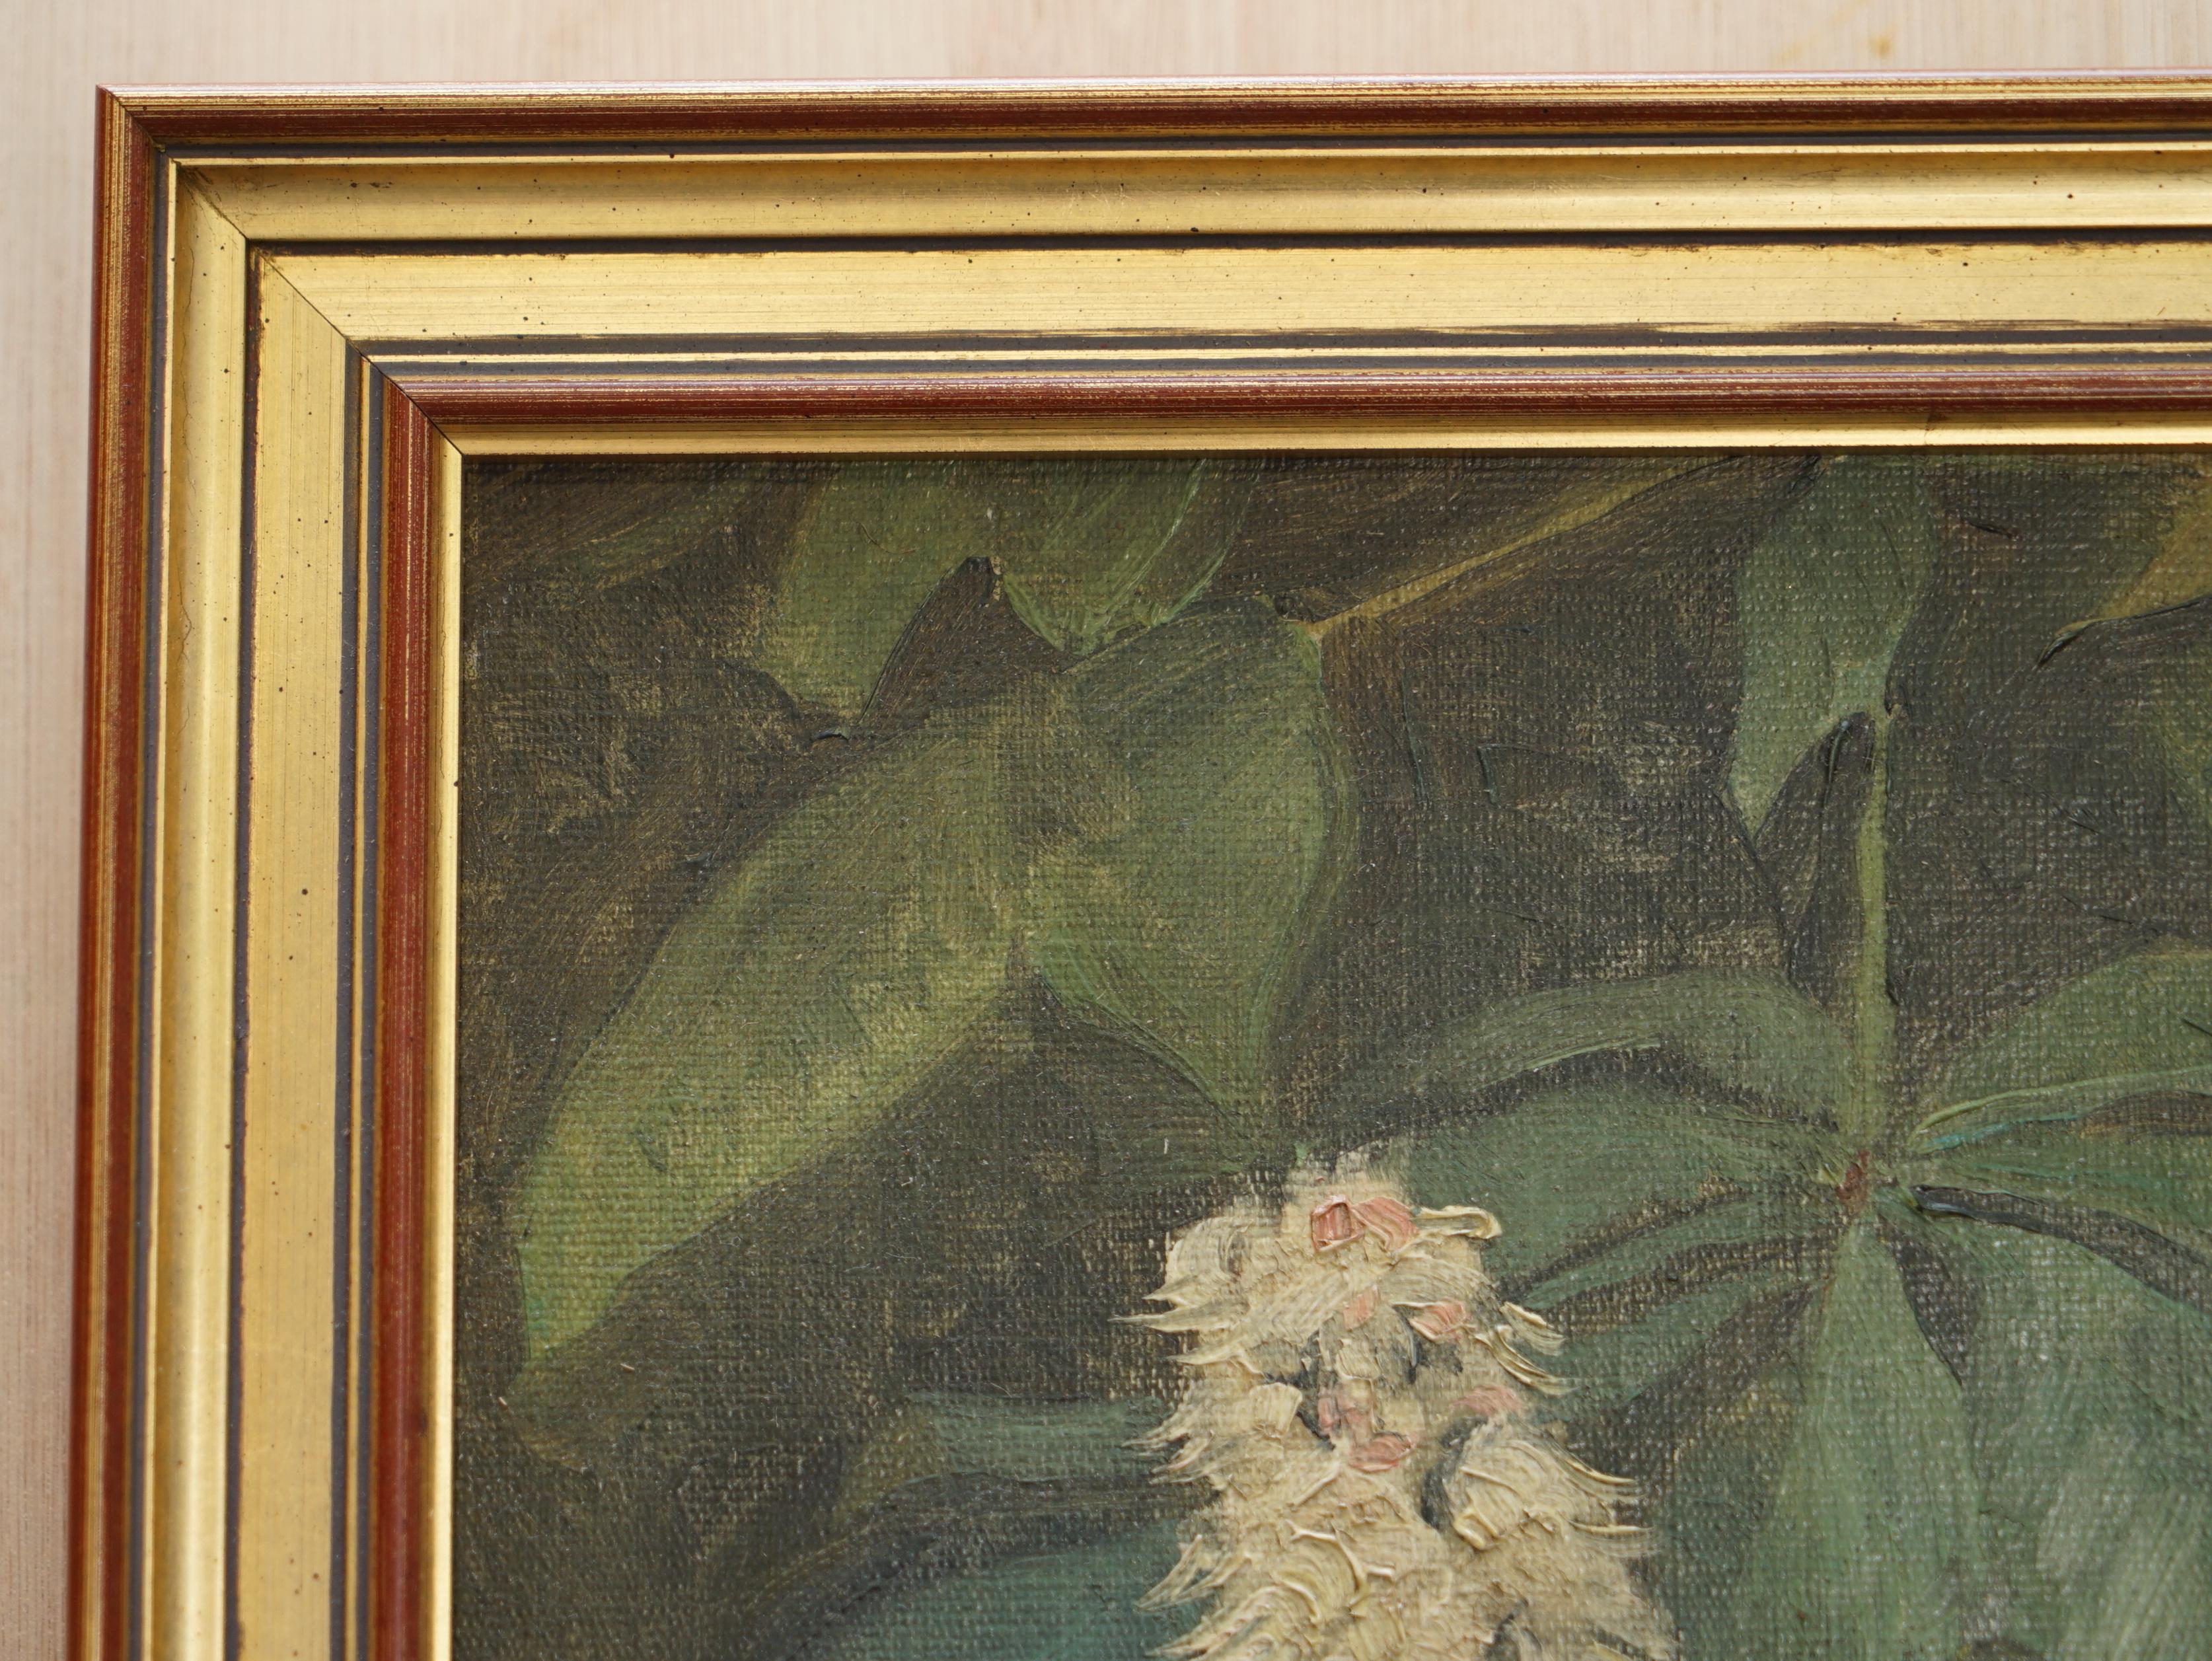 Hand-Crafted Lovely Victorian Oil on Canvus Painting by E.Drvee circa 1880-1900 of Flowers